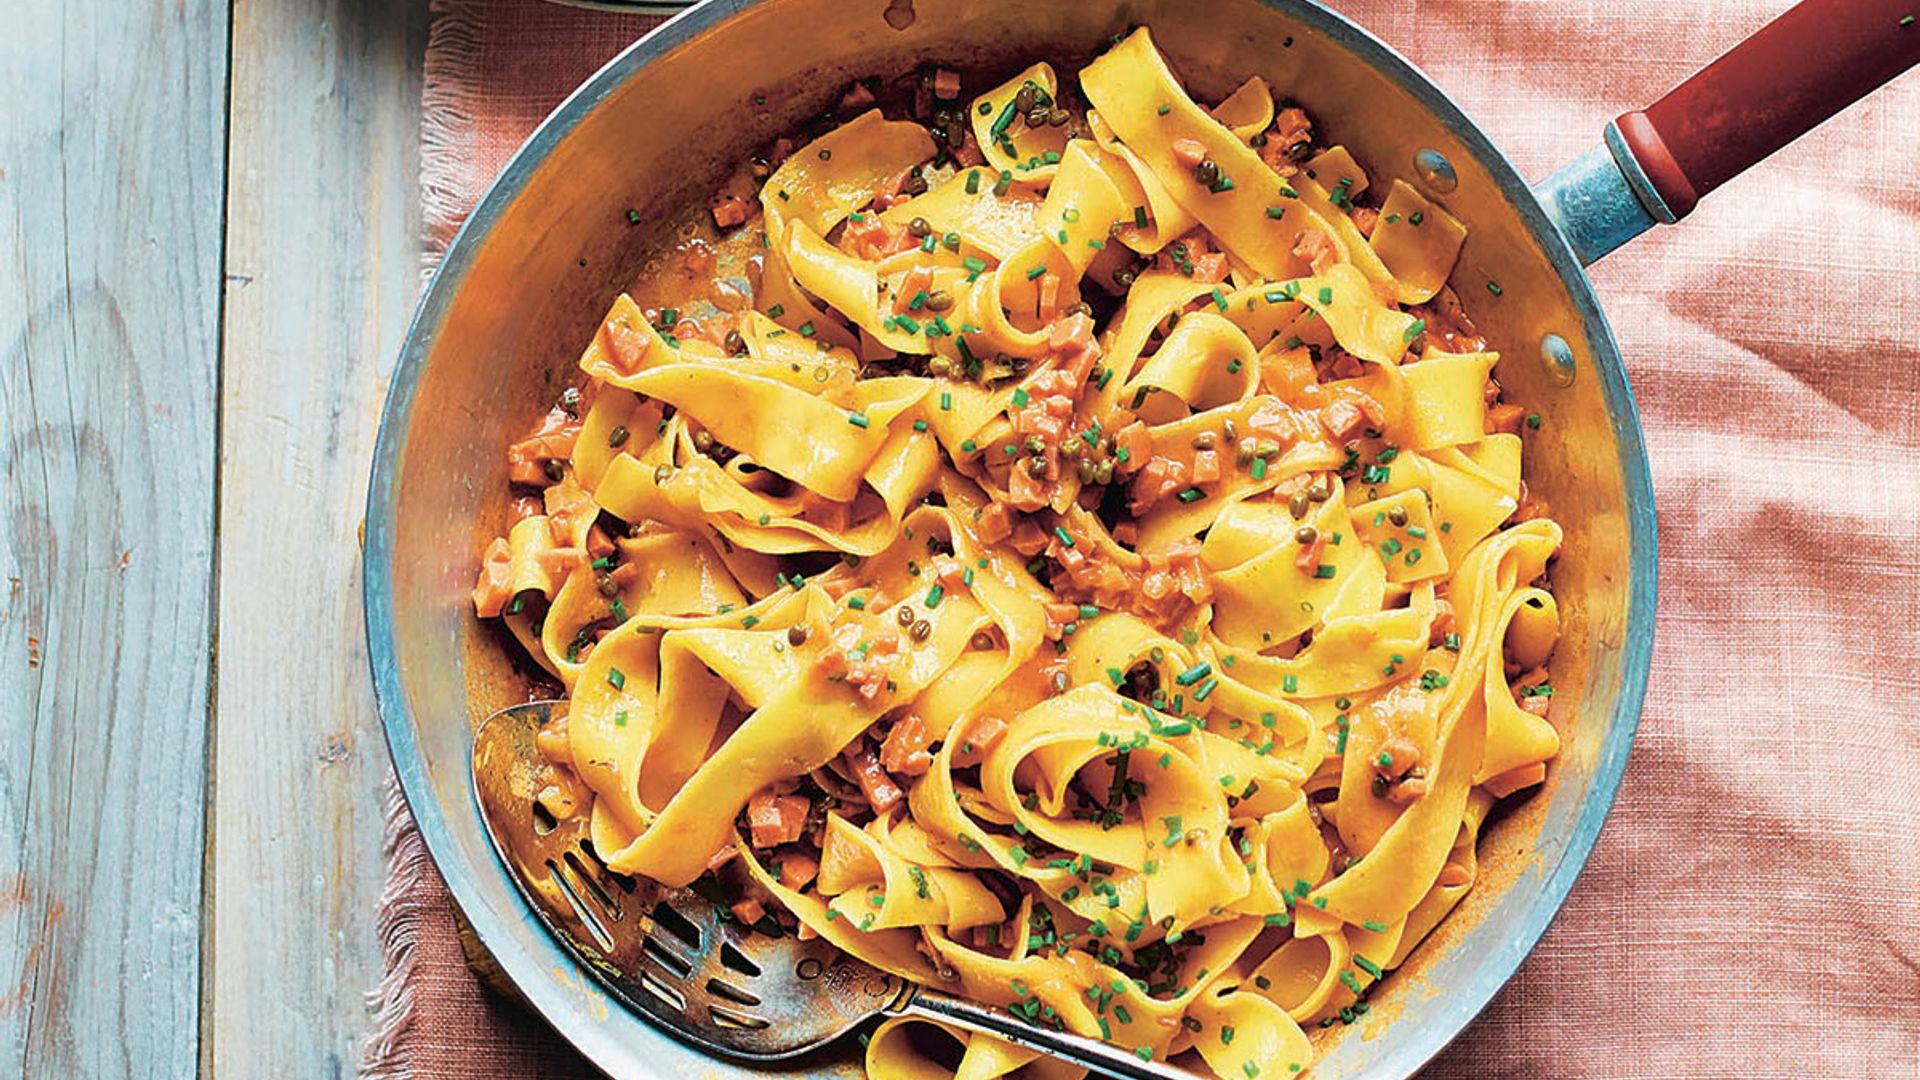 If you love comfort food then you will love this smoked sausage stroganoff with an Italian twist